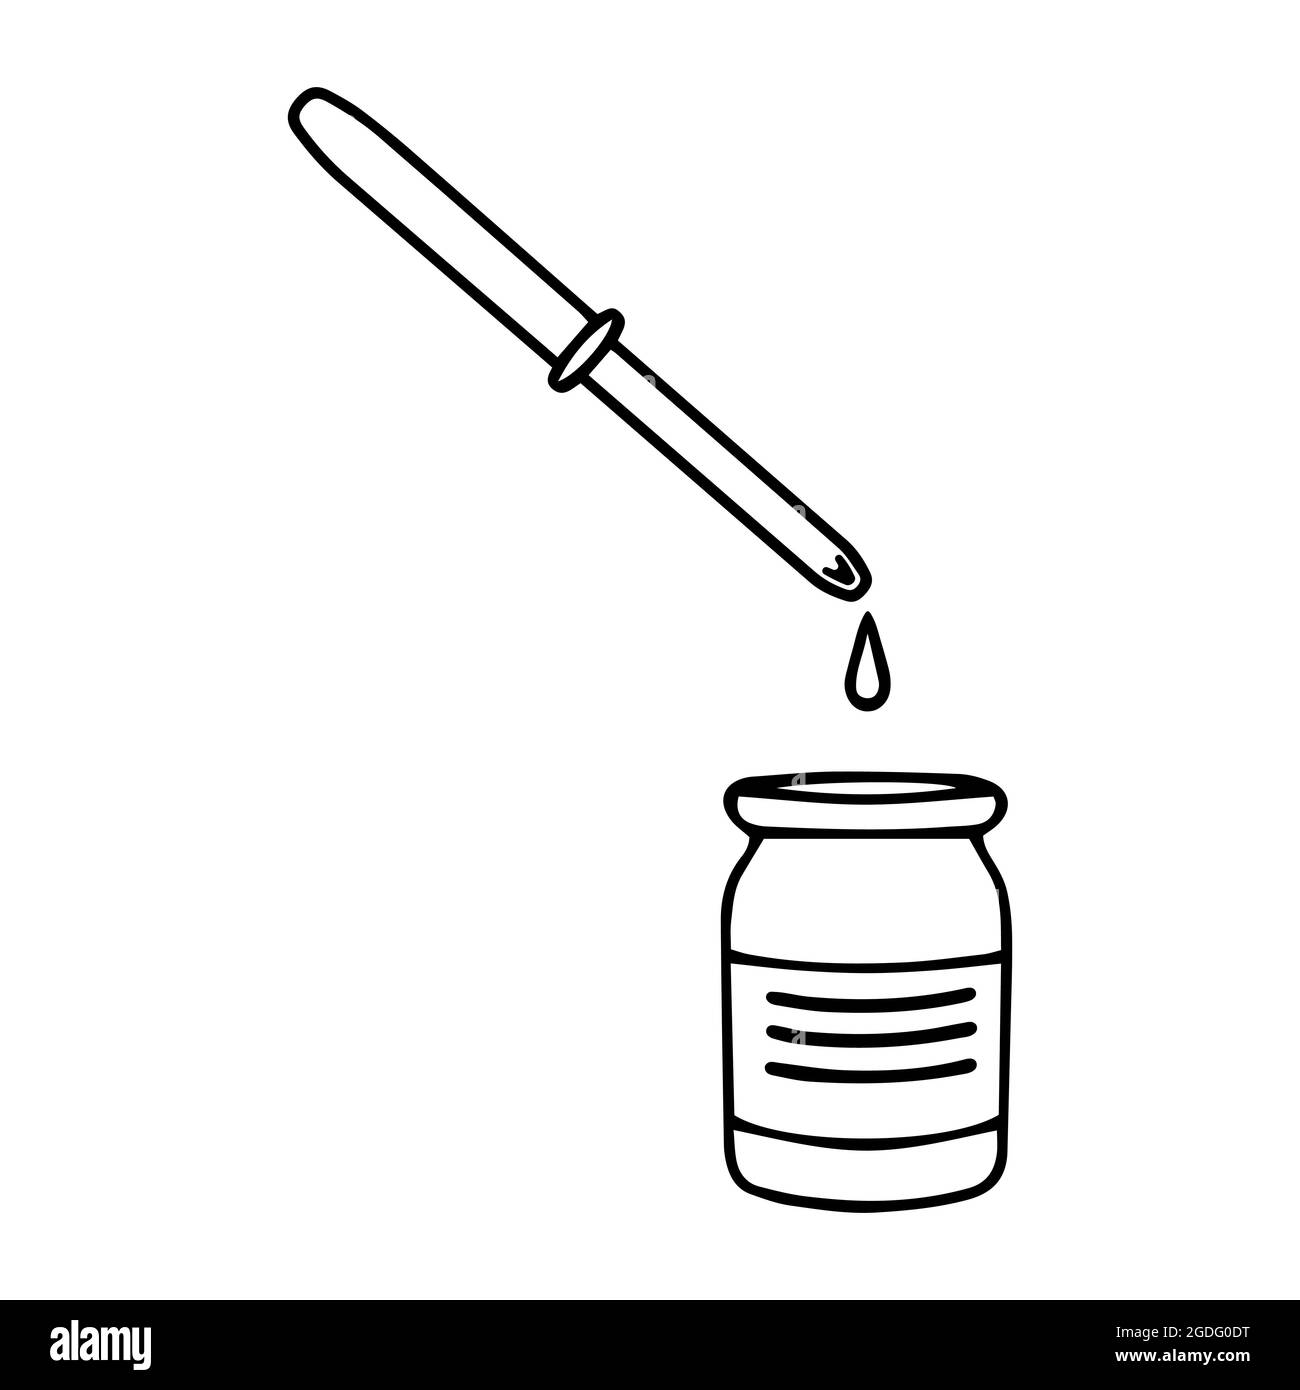 Pharmacy pipette with a bottle of medicine in the style of doodles in vector format, suitable for use on the Internet, print or advertising. Stock Vector